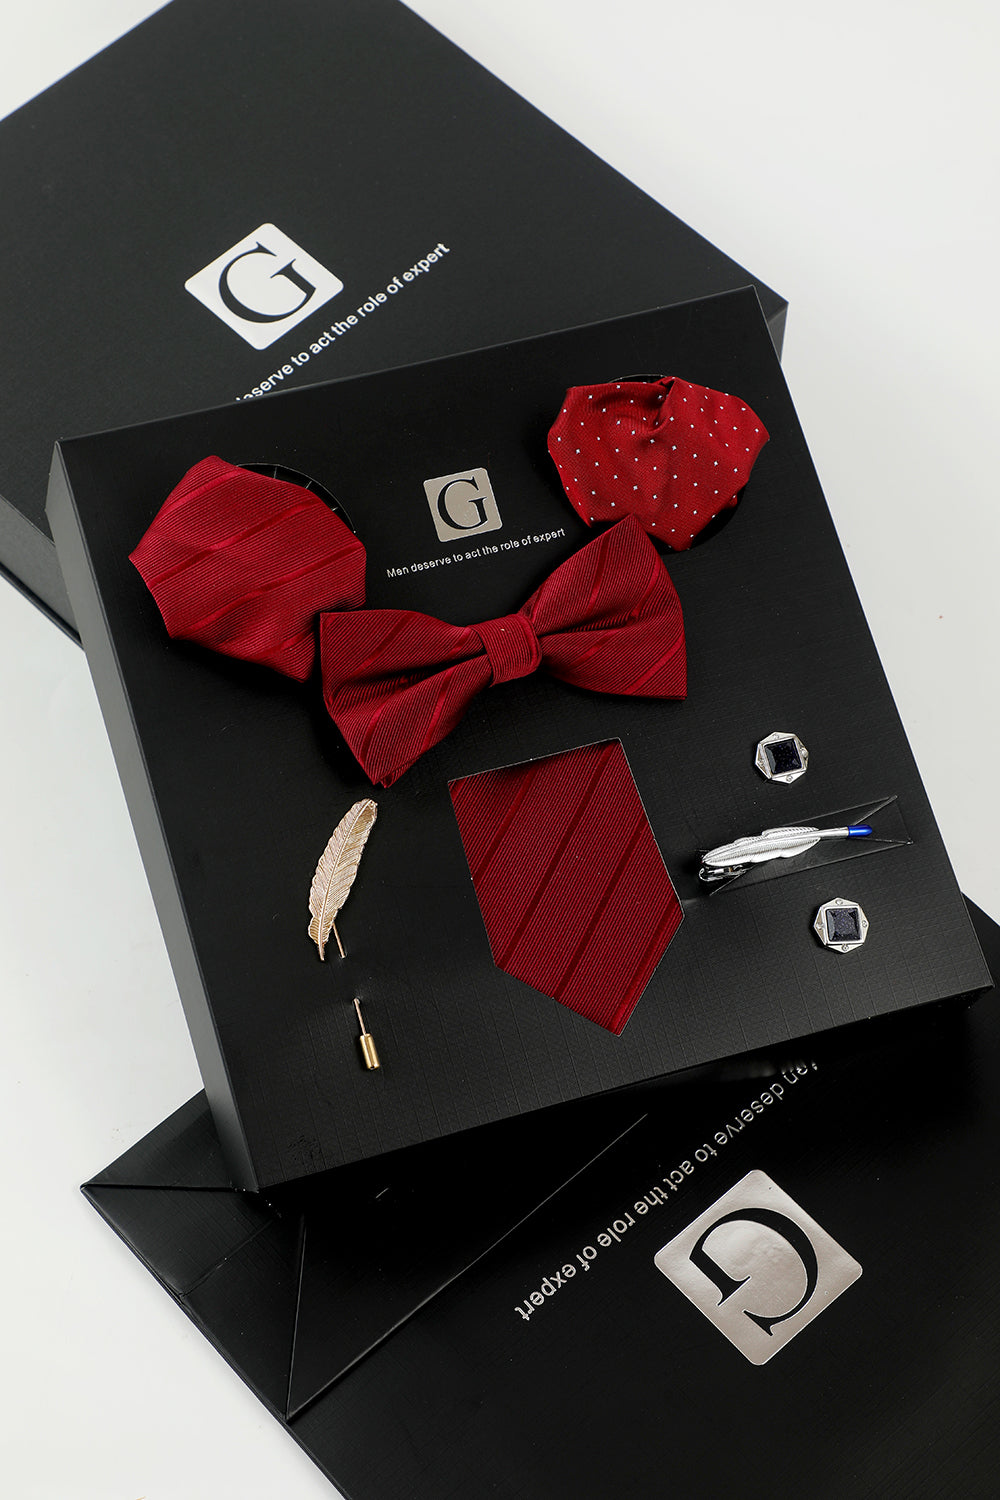 Burgundy Men's Accessory Set Tie and Bow Tie Two Pocket Square Lapel Pin Tie Clip Cufflinks